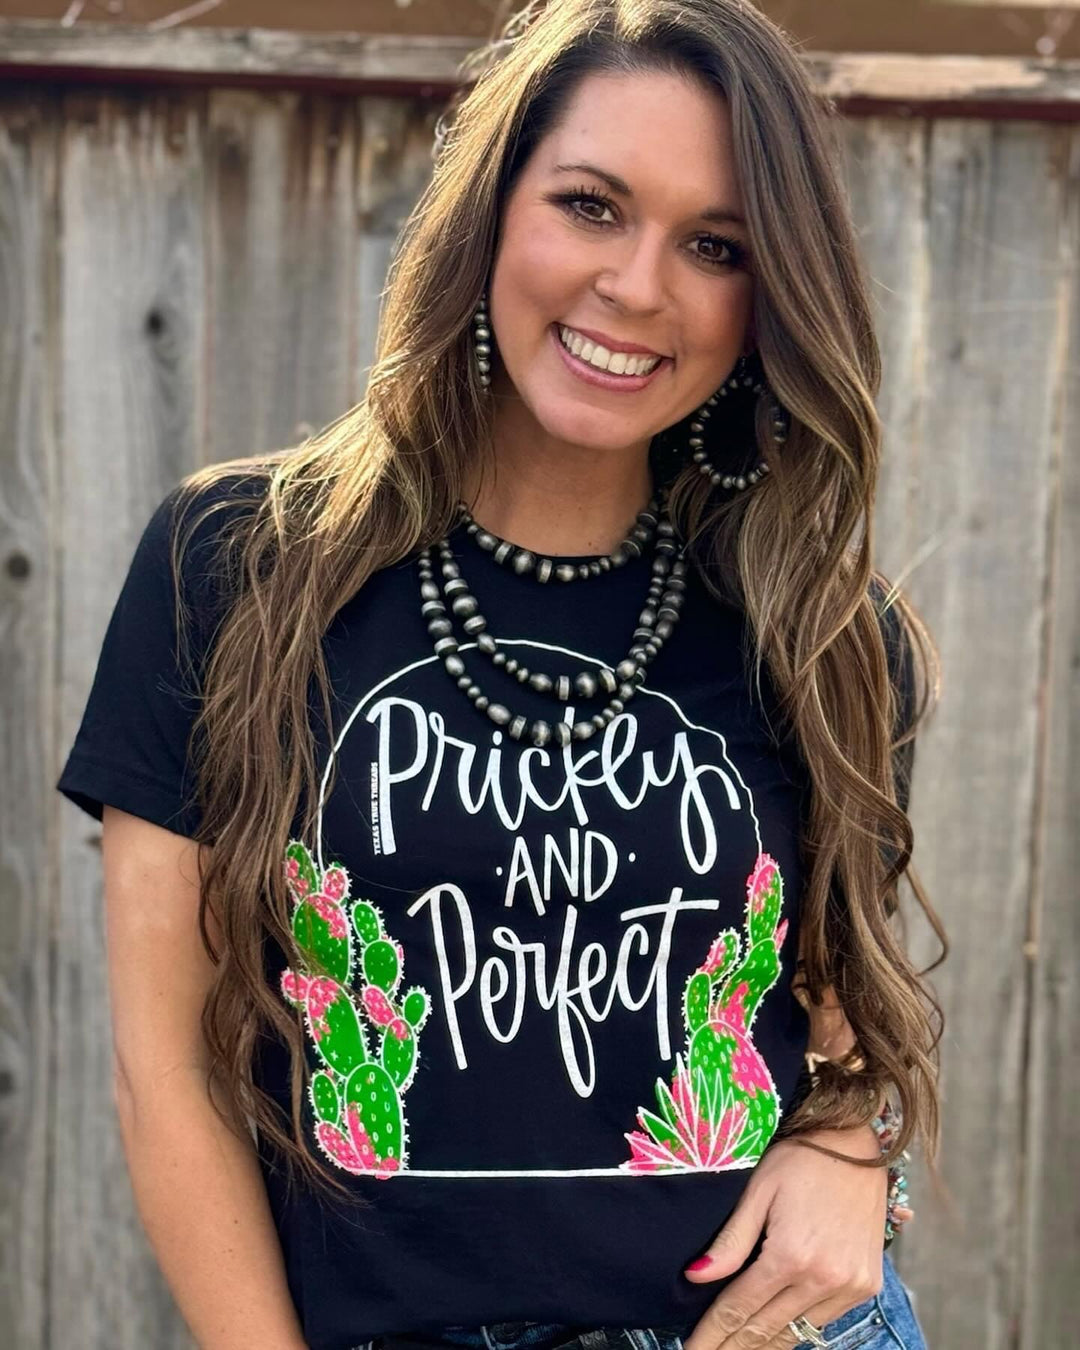 Prickly and Perfect Graphic Tee by Texas True Threads